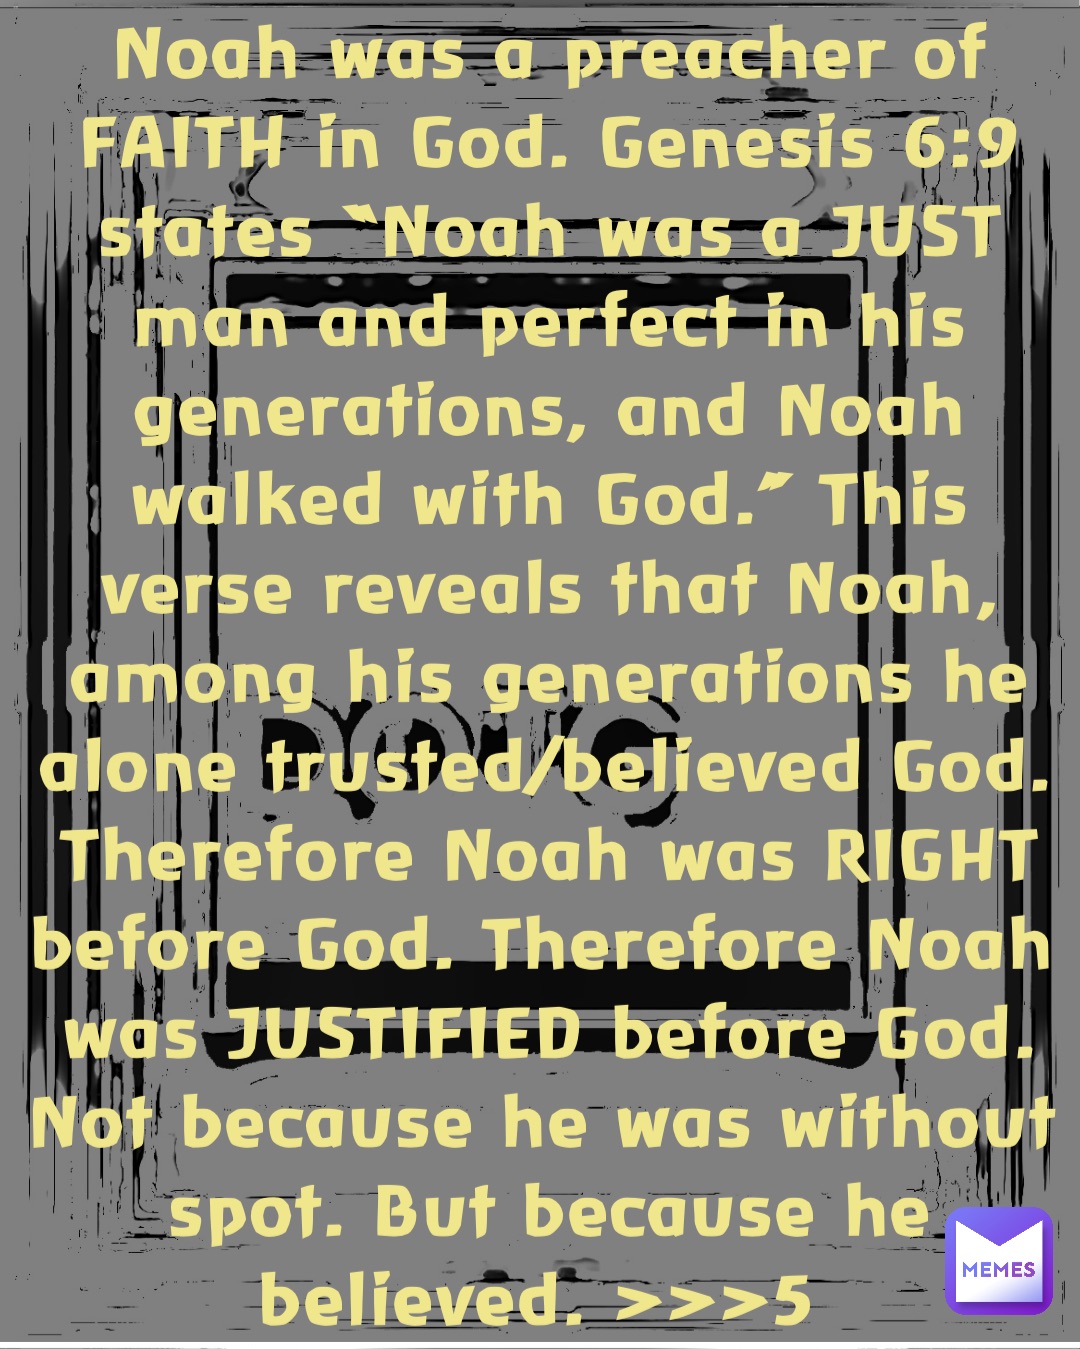 Noah was a preacher of FAITH in God. Genesis 6:9 states “Noah was a JUST man and perfect in his generations, and Noah walked with God.” This verse reveals that Noah, among his generations he alone trusted/believed God. Therefore Noah was RIGHT before God. Therefore Noah was JUSTIFIED before God. Not because he was without spot. But because he believed. >>>5